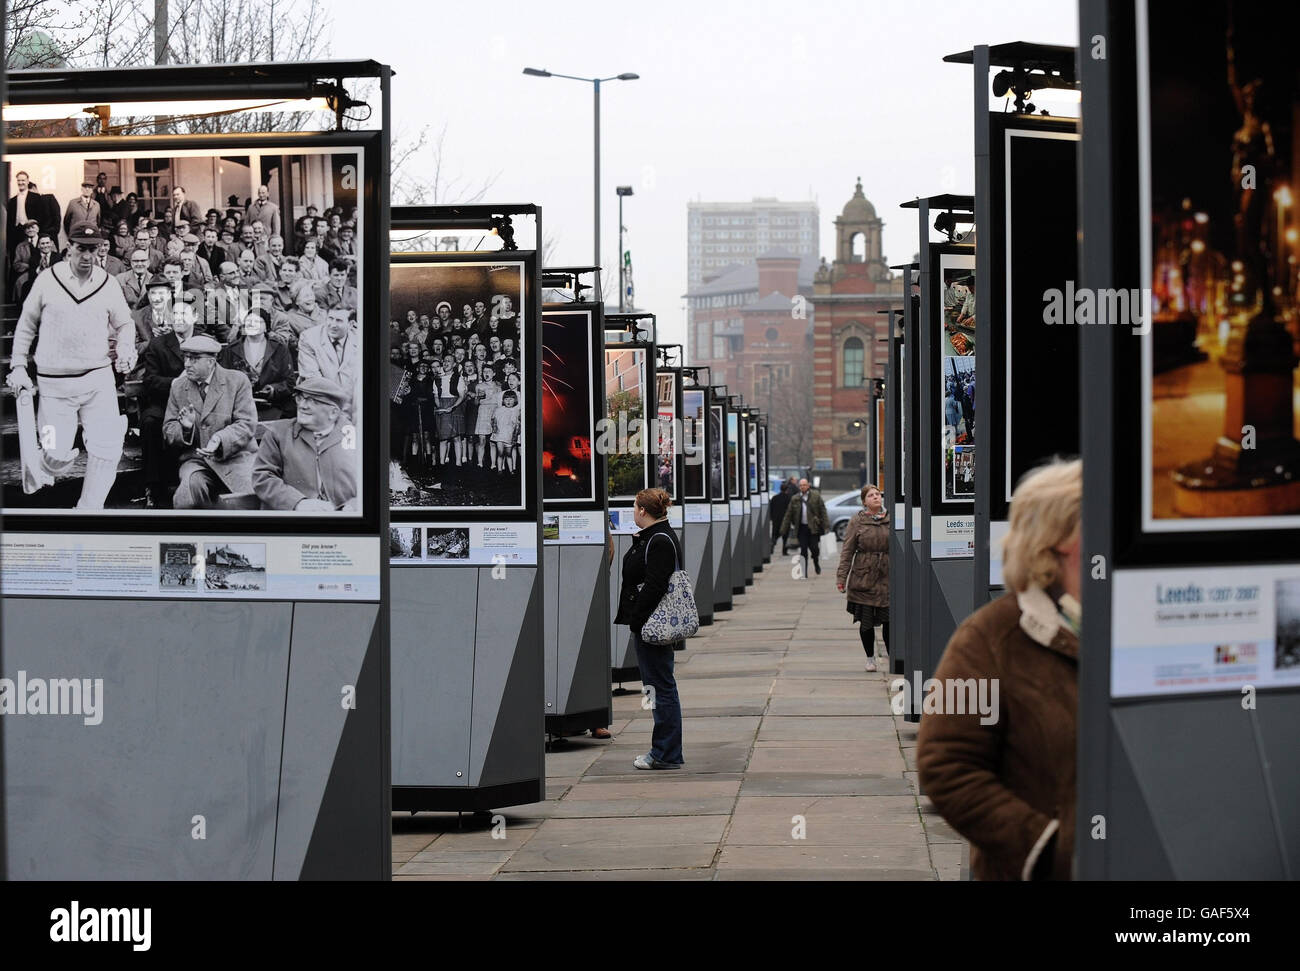 An outdoor photographic exhibition showing 800 years of life in the City of Leeds is proving a draw for Xmas shoppers as the gallery runs up one side of the Headrow, the main shopping street in Leeds. Stock Photo